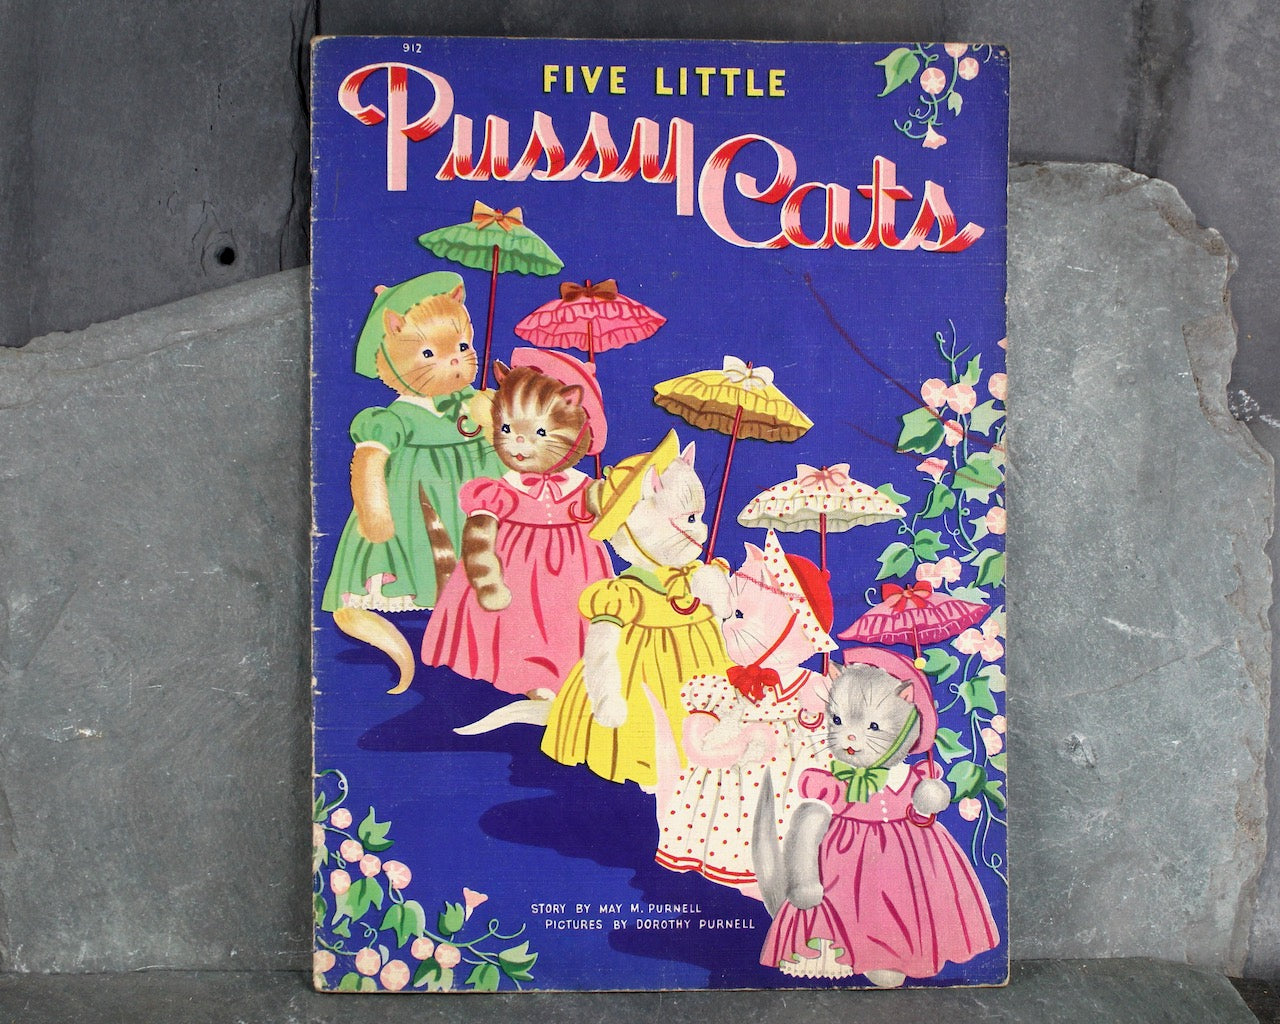 10) 1940s Childrens Coloring Books Dot Paint Oversized Upcycle